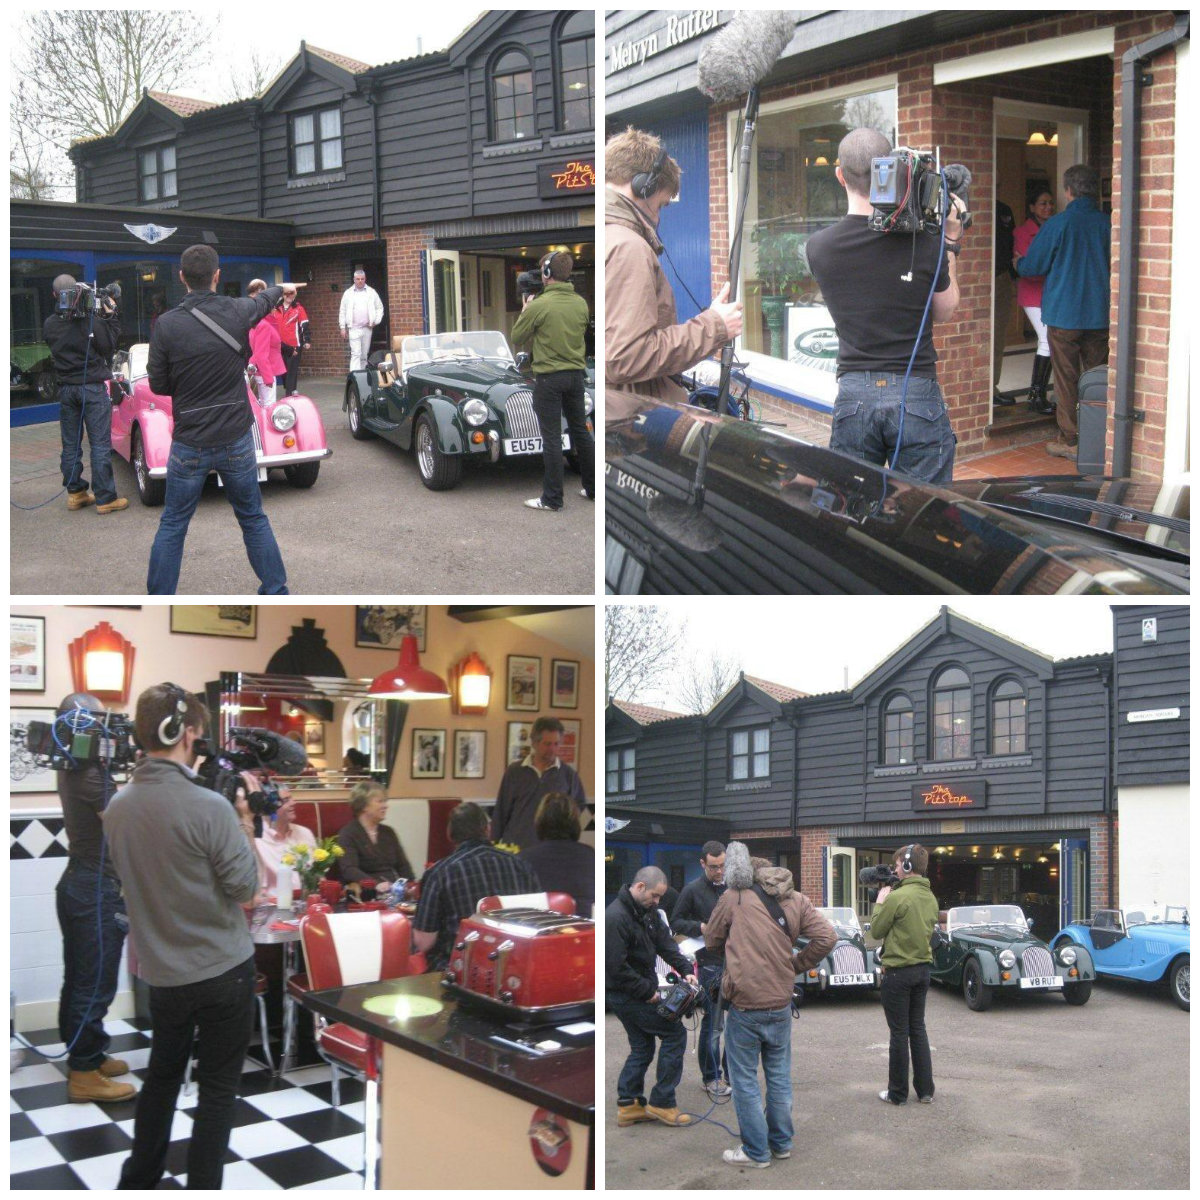 The PitStop Hotel on BBC 4 in a bed - Essex B&B